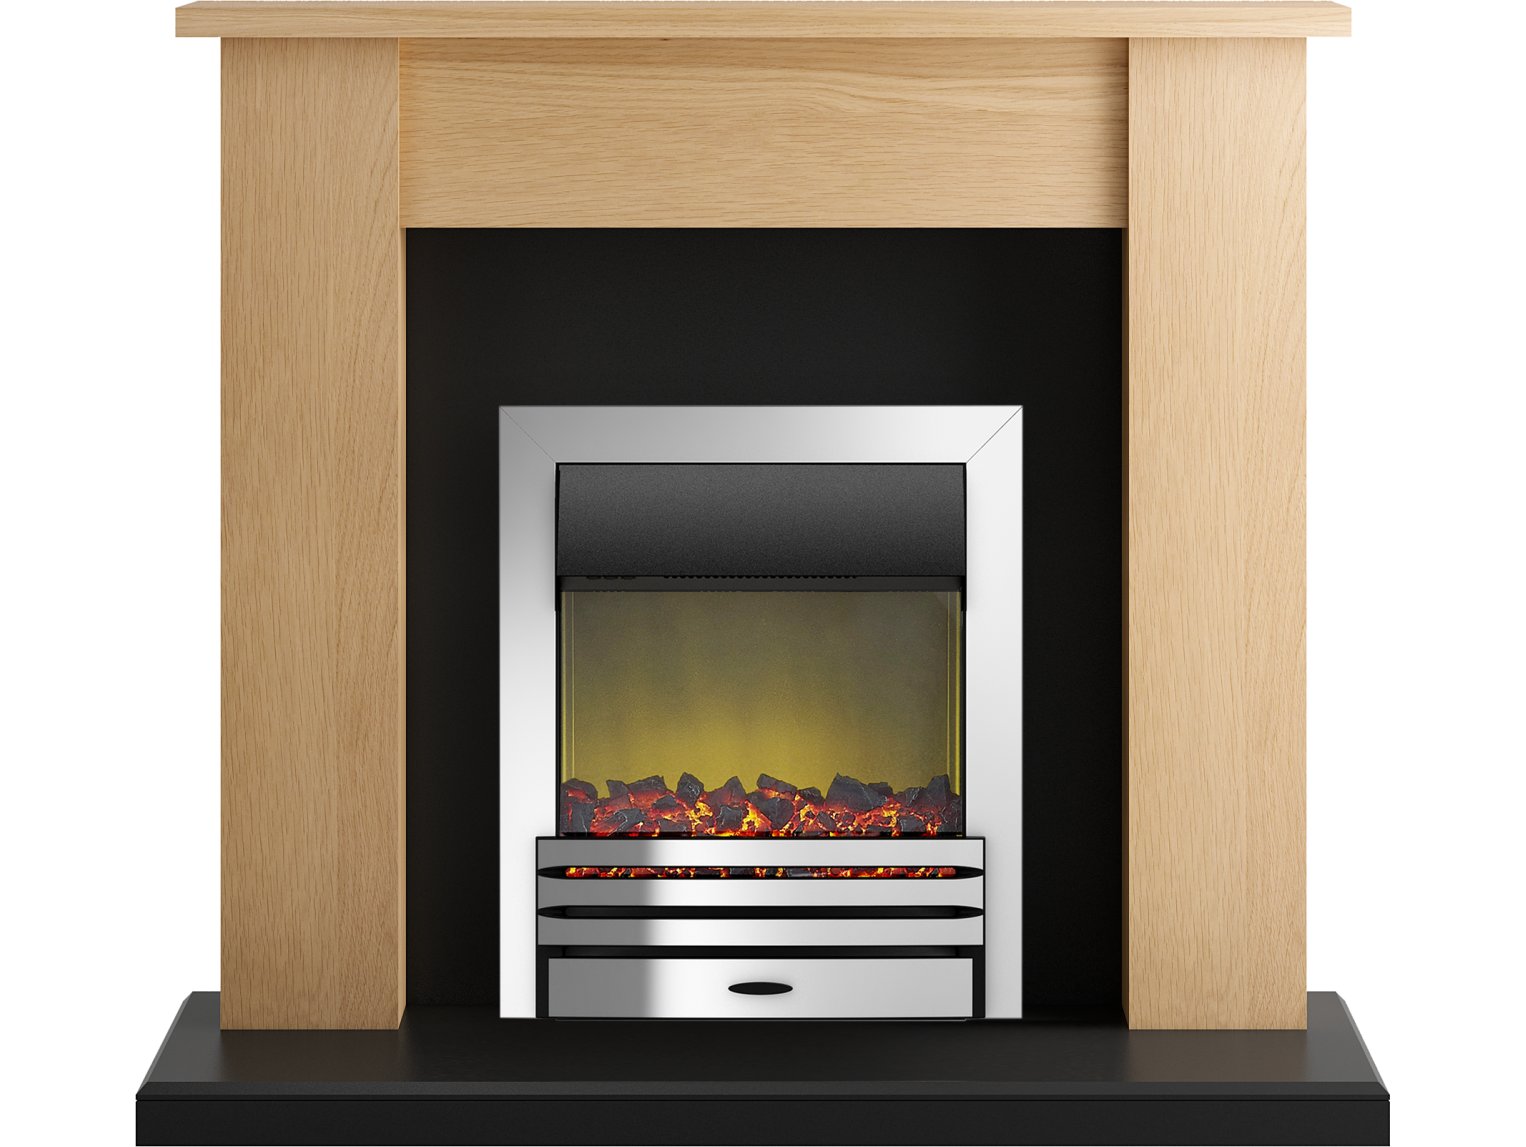 Adam New England Fireplace Suite in Oak and Black with Eclipse Fire in Chrome, 48 Inch